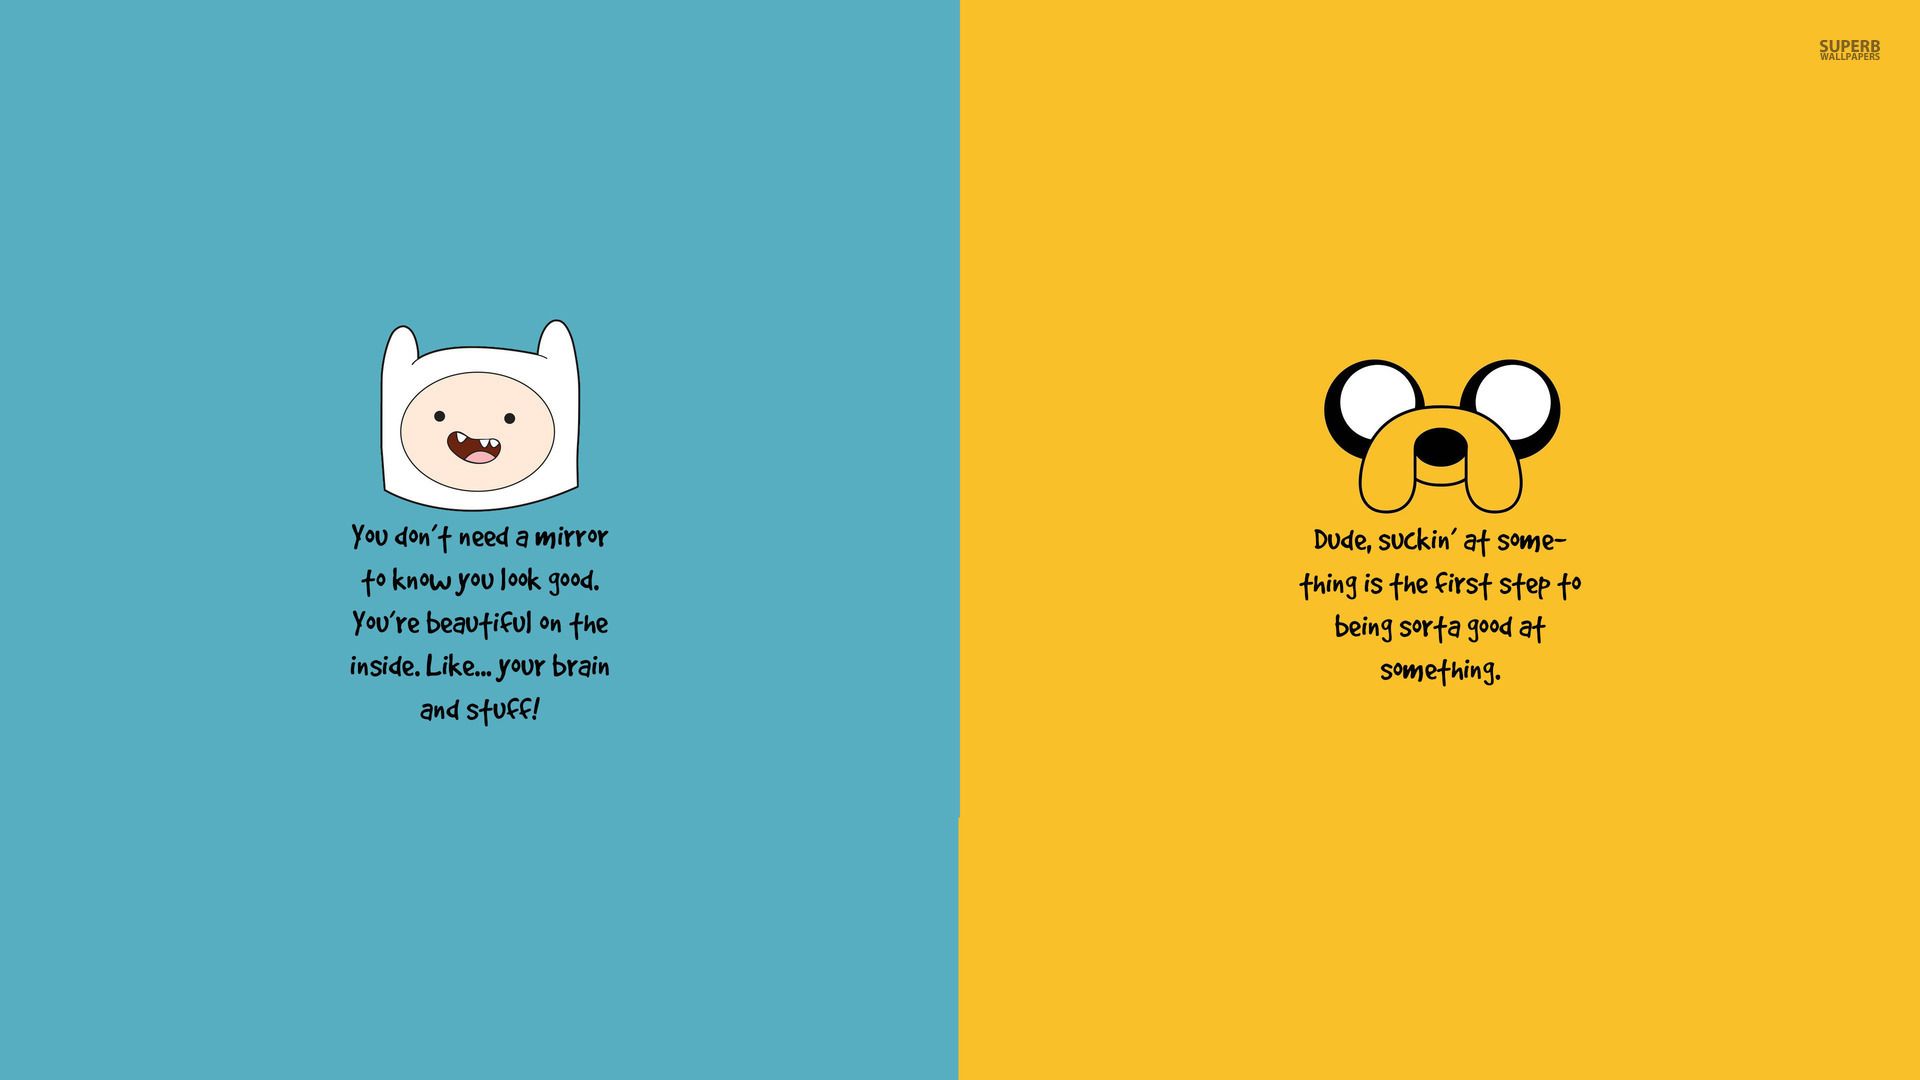 Adventure Time Ipad Wallpapers